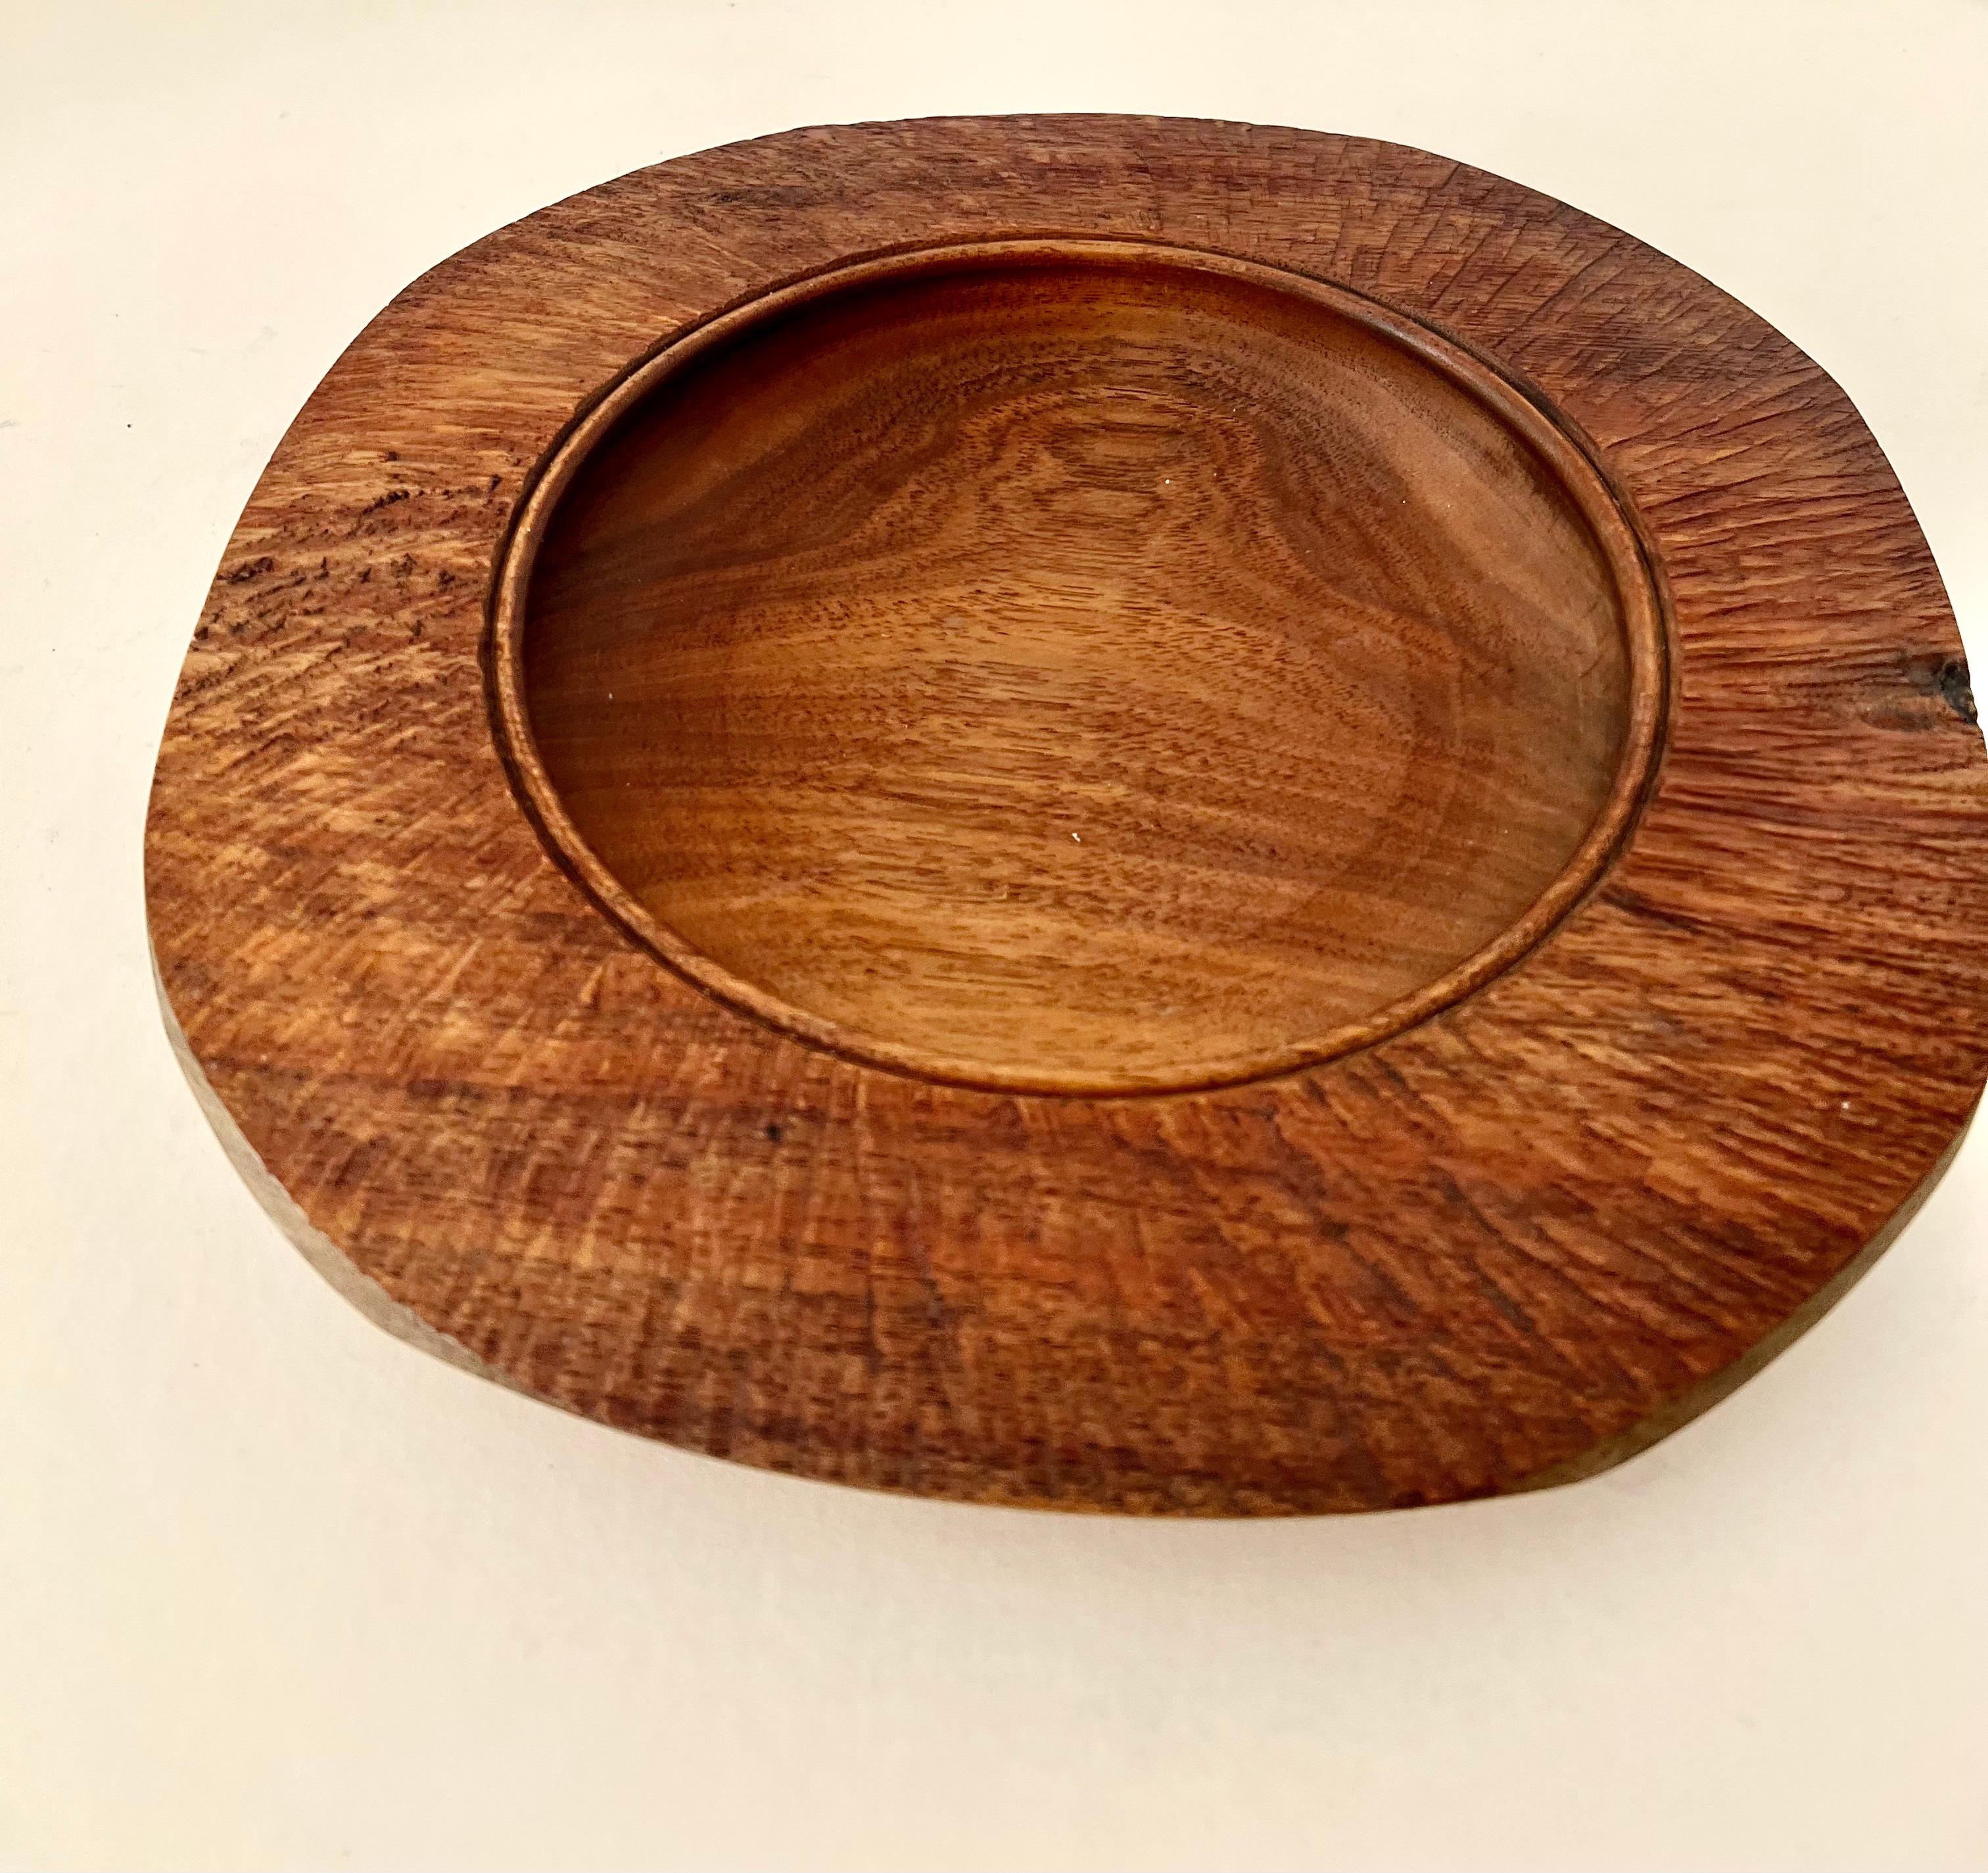 Hand Made New Zealand Blackwood / hardwood bowl. a 2.5 inch diameter of the outer rim is a remarkable rough hewn edge, while the inside that dips down to be a bowl or deep plate, is smooth and symmetrical.

A compliment to any natural setting, on